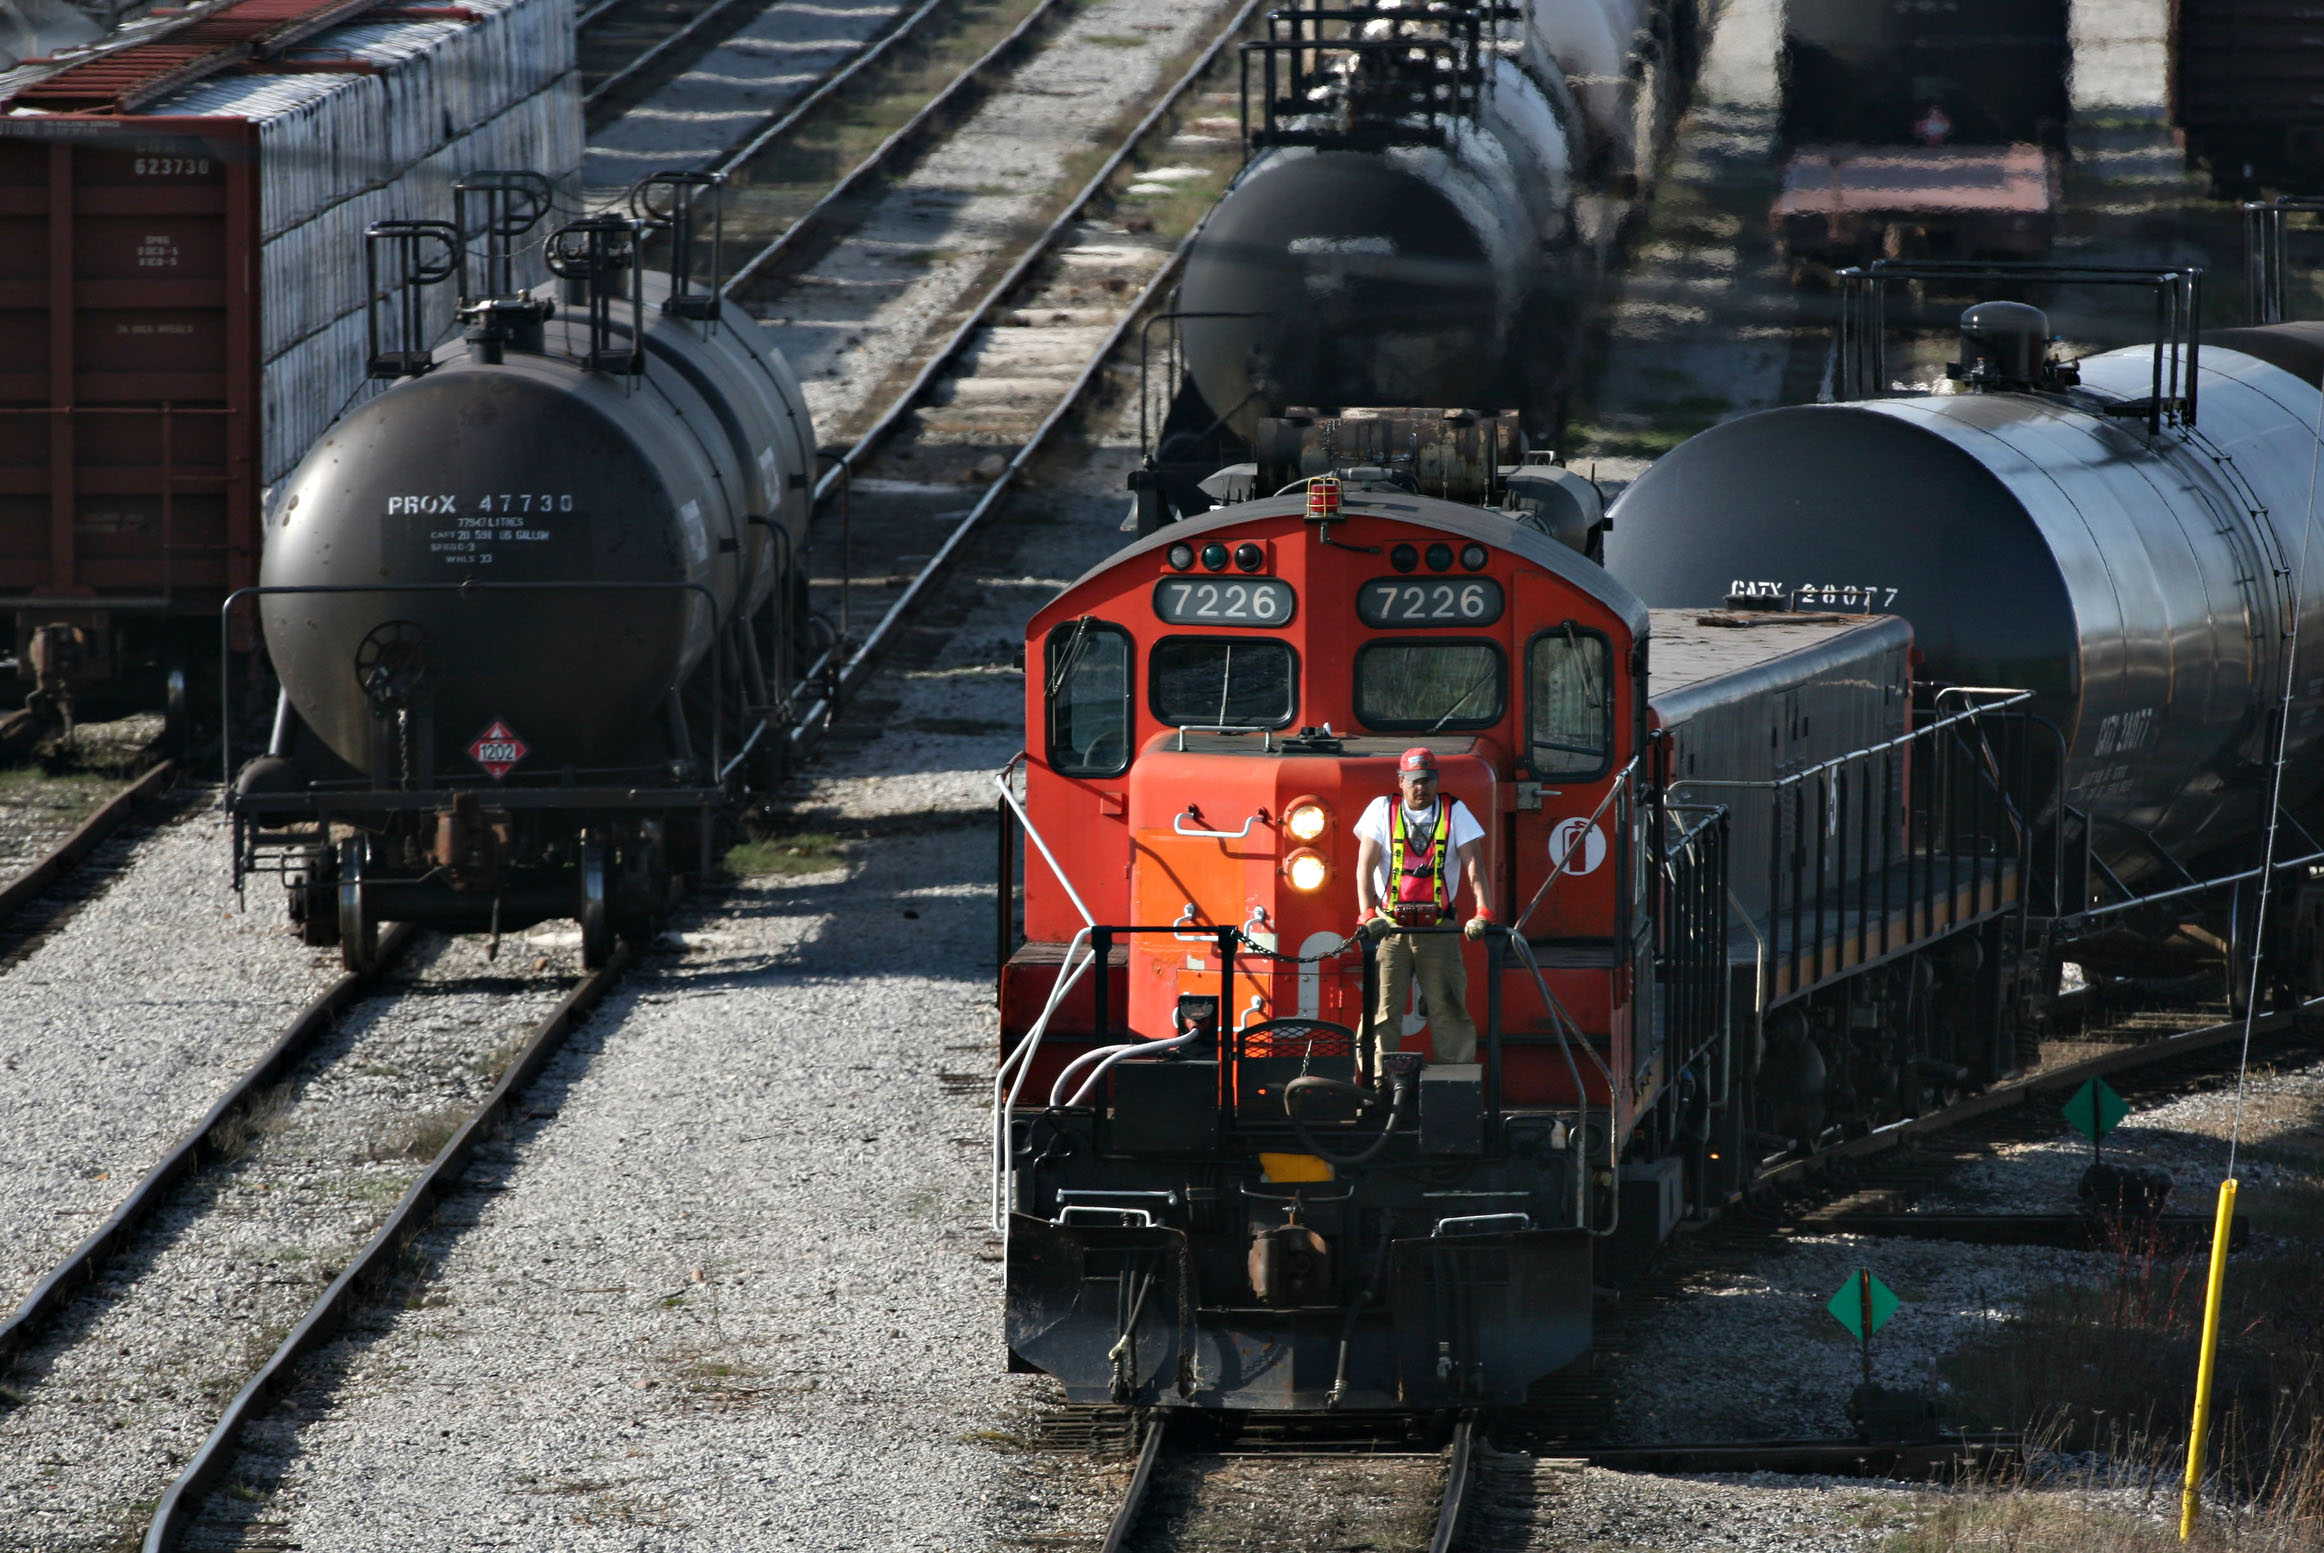 A railway worker stands in the front of a Canadian National Raliway Co. freight train as it moves through their Macmillan yard, north of Toronto, Ontario, Canada, Wednesday, April 19, 2006. Photographer: Norm Betts/Bloomberg